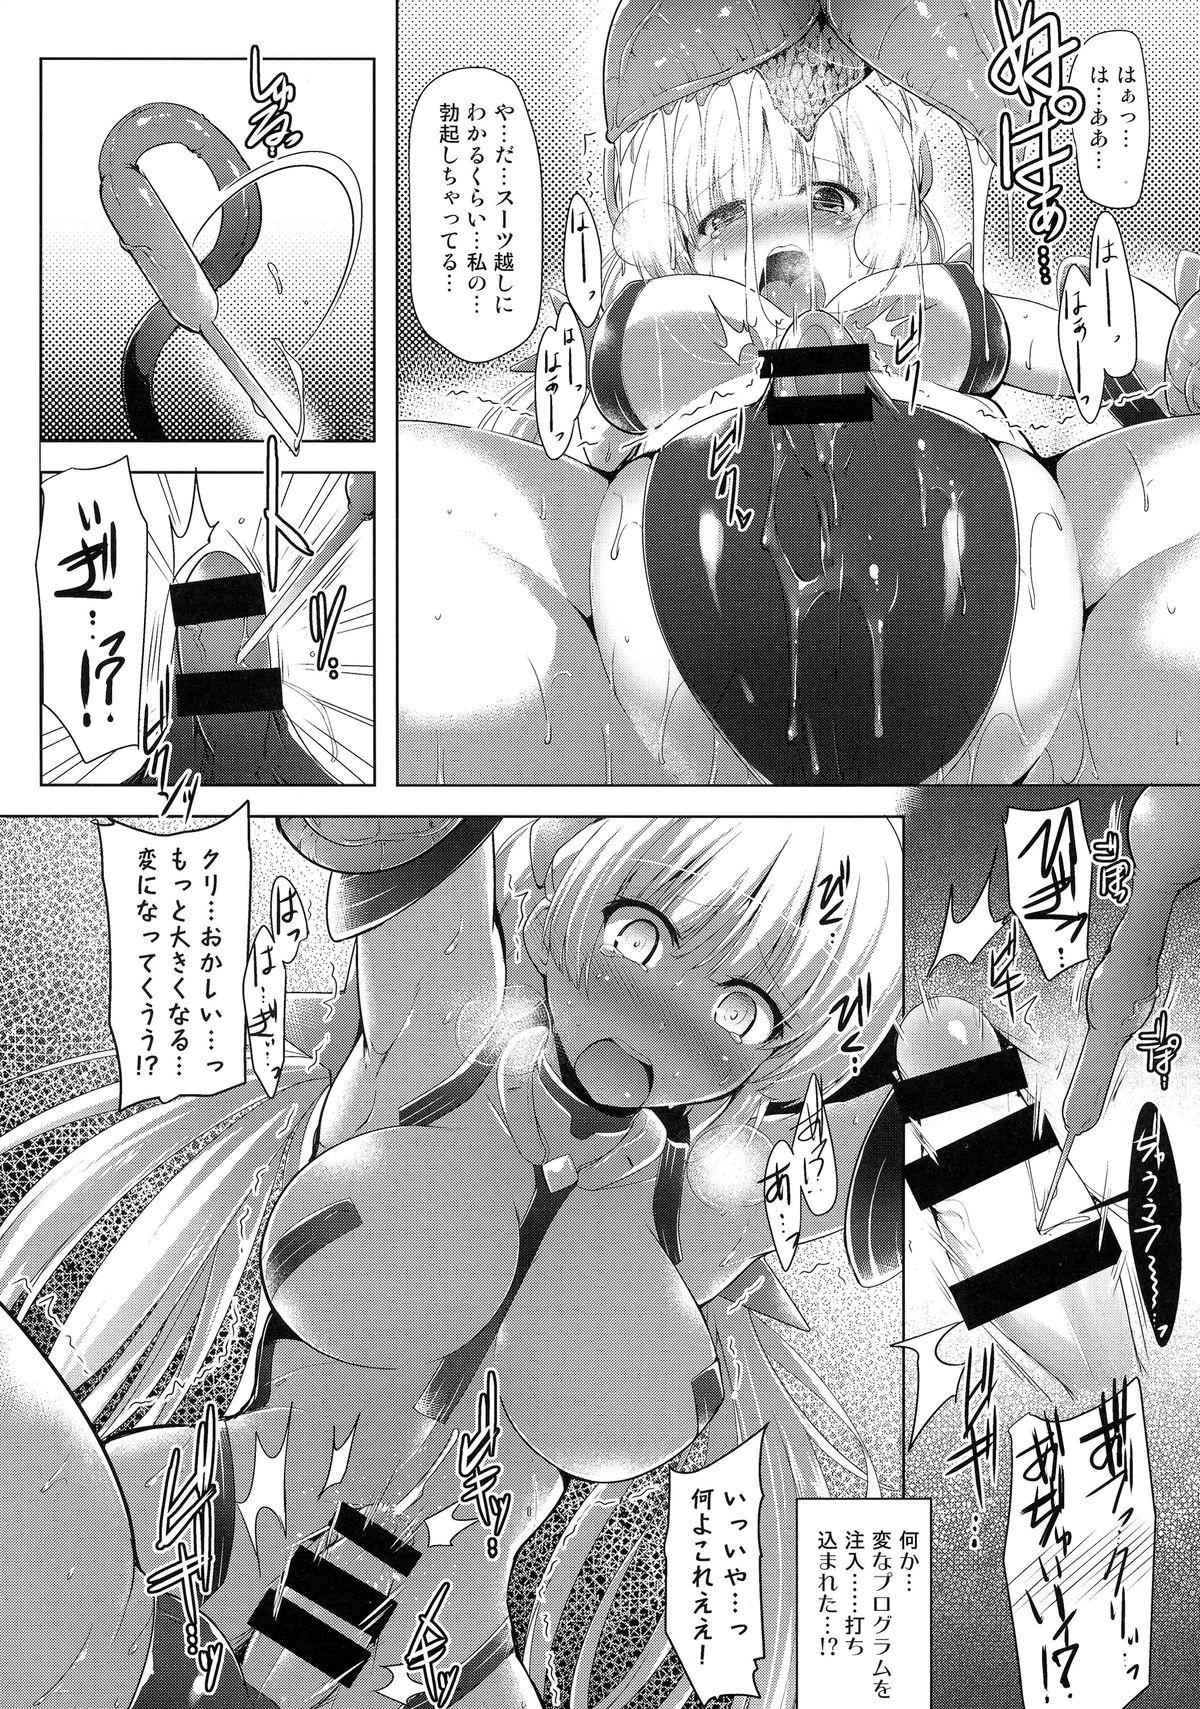 Throatfuck K.231 - Expelled from paradise Throatfuck - Page 8